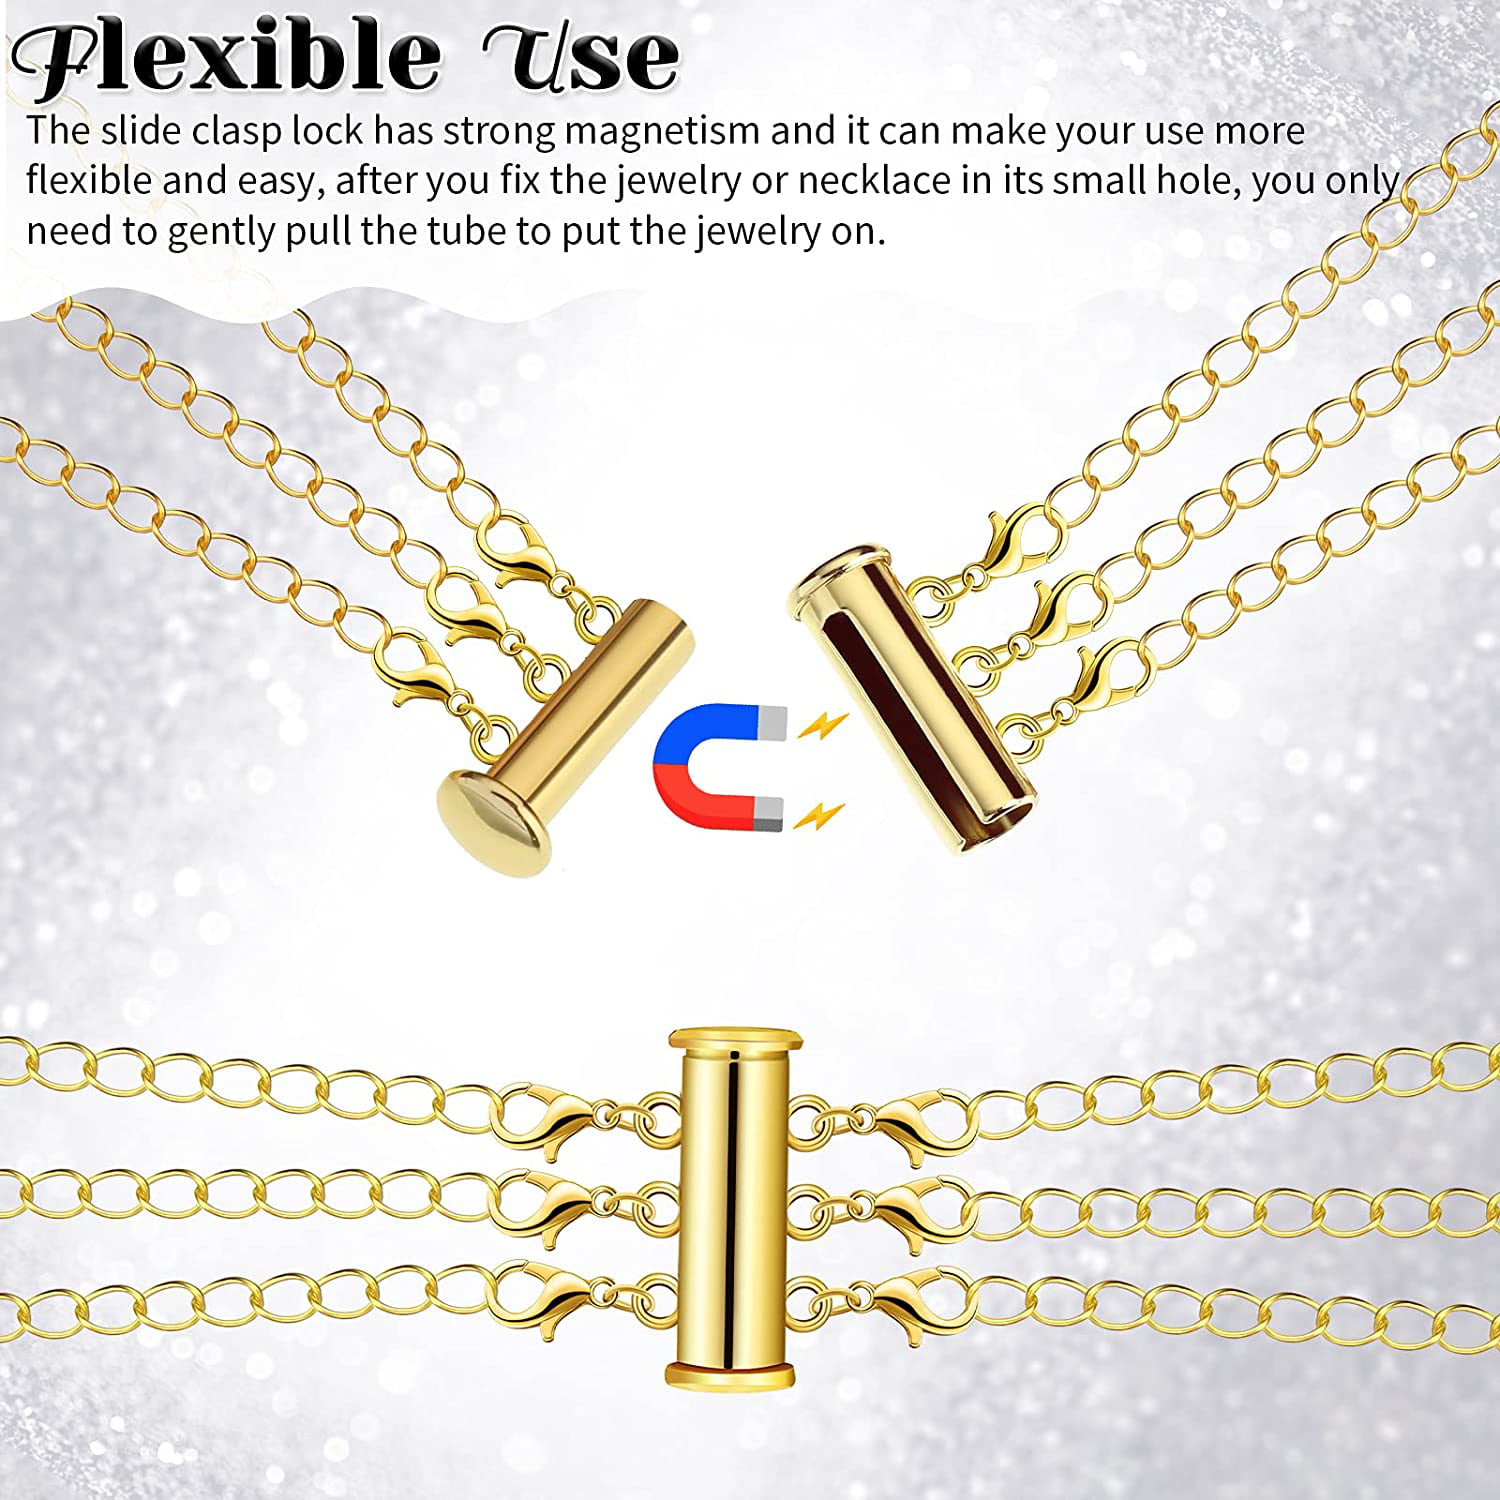 Jewelry Accessories Slide Clasp Lock Tube Lock Connectors Necklace Spacer  Clasp Jewelry Clasps – the best products in the Joom Geek online store